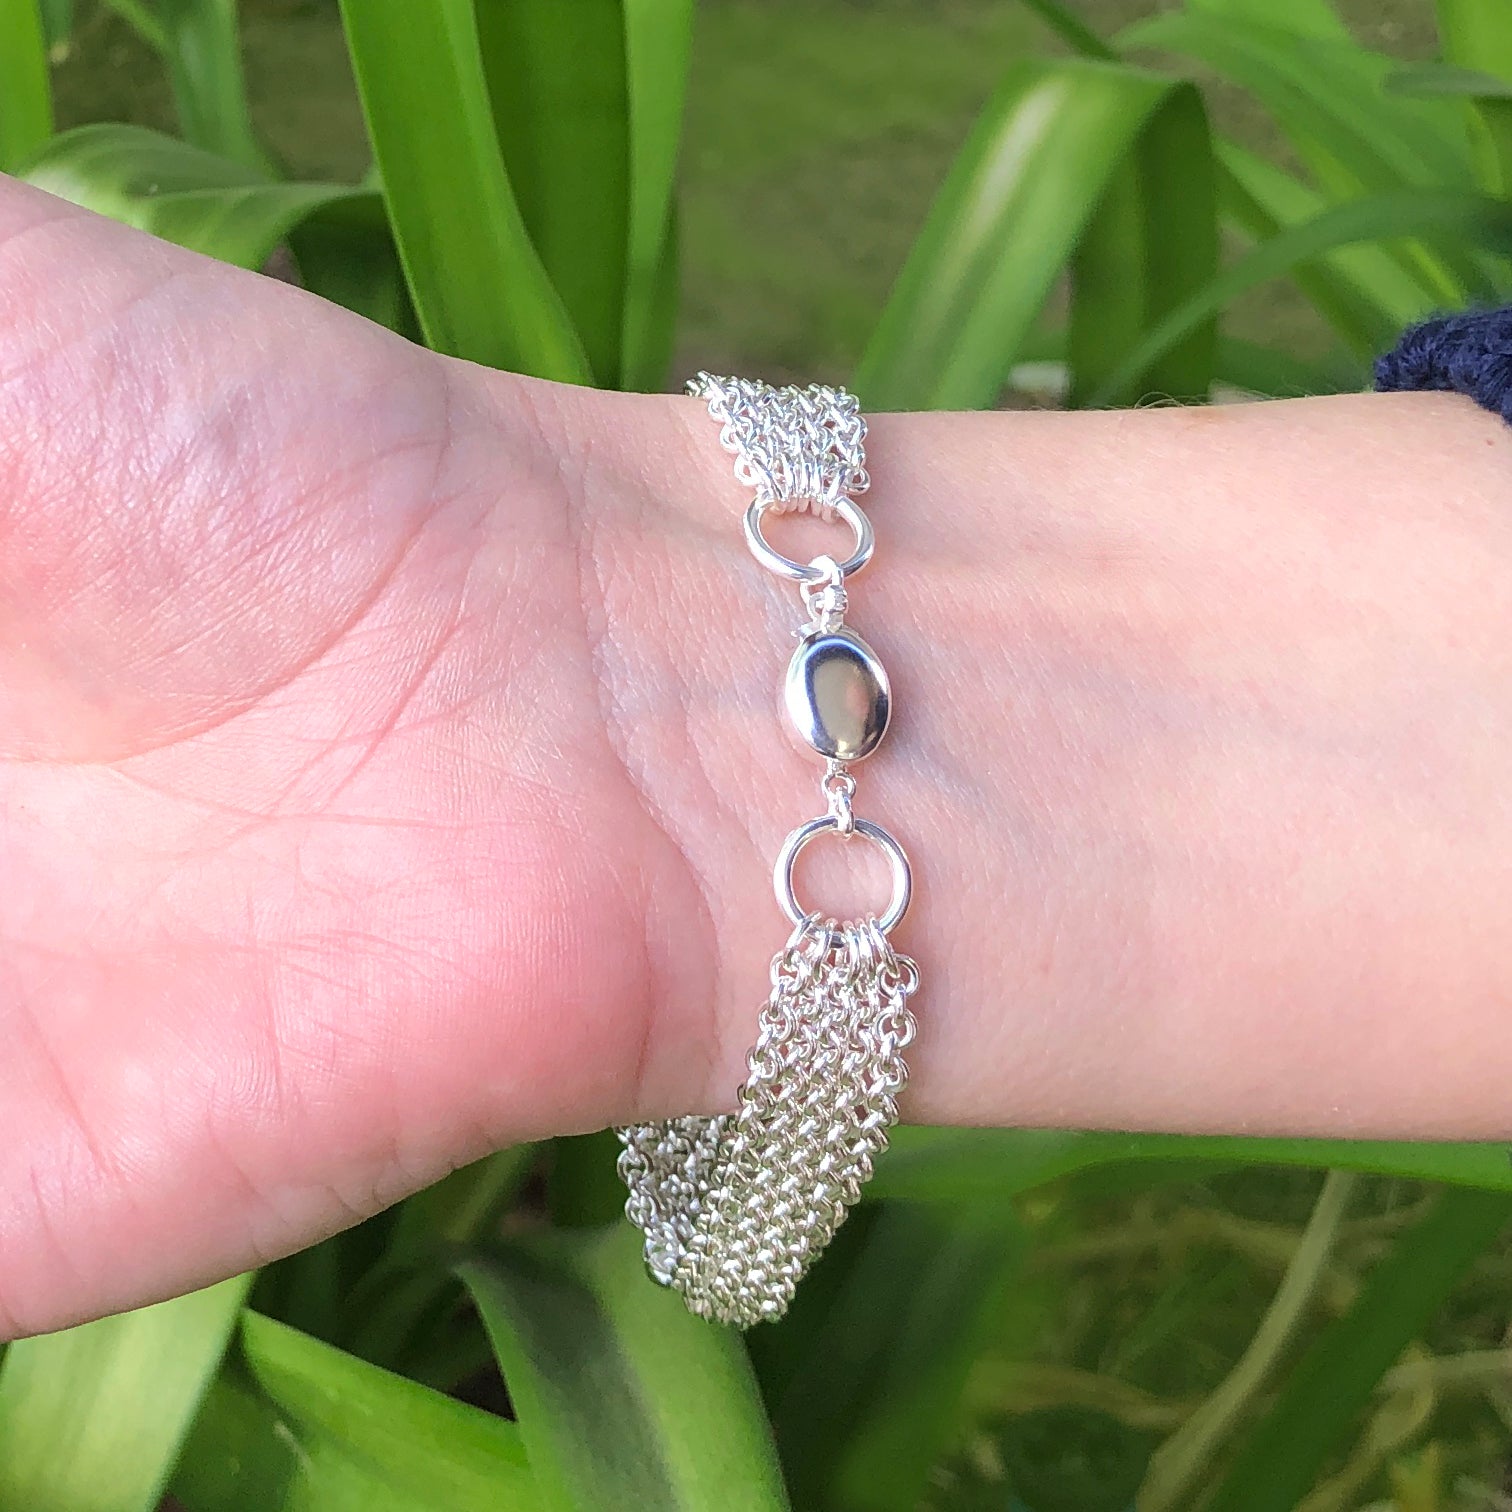 Stylish Mixed Style Burst Womens Gas Plated Sterling Silver Bracelet With  Hanging Ball And Hollow Heart Star Design On 925 Silver Gas Plate EMB5 From  East_mei, $3.86 | DHgate.Com